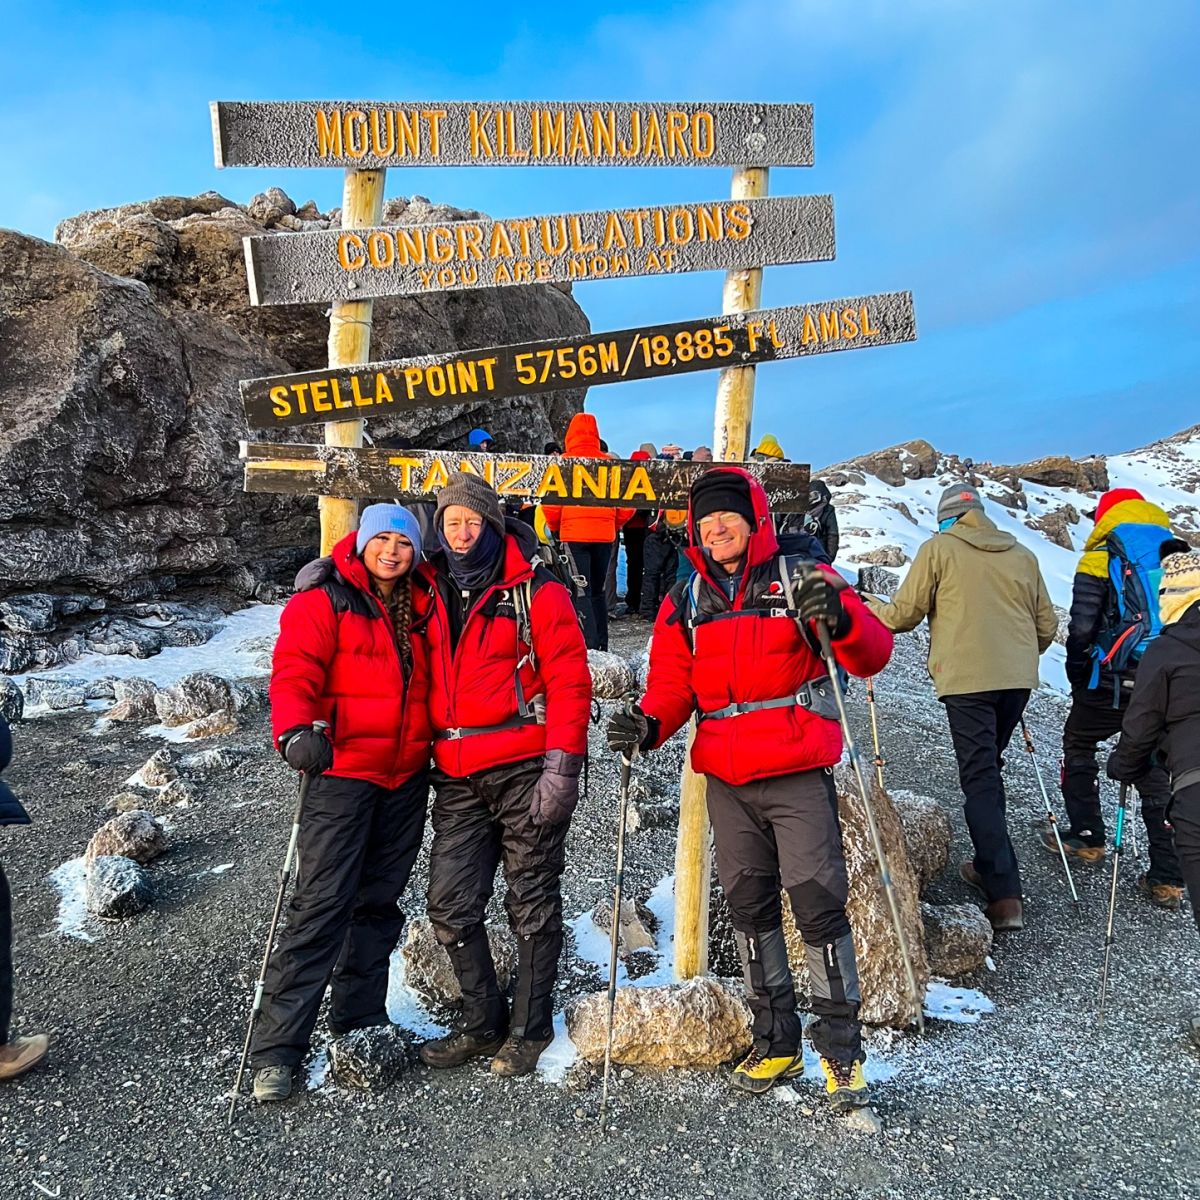 Three climbers of different ages in Follow Alice down jackets at Stella Point sign on Mt Kilimanjaro trek